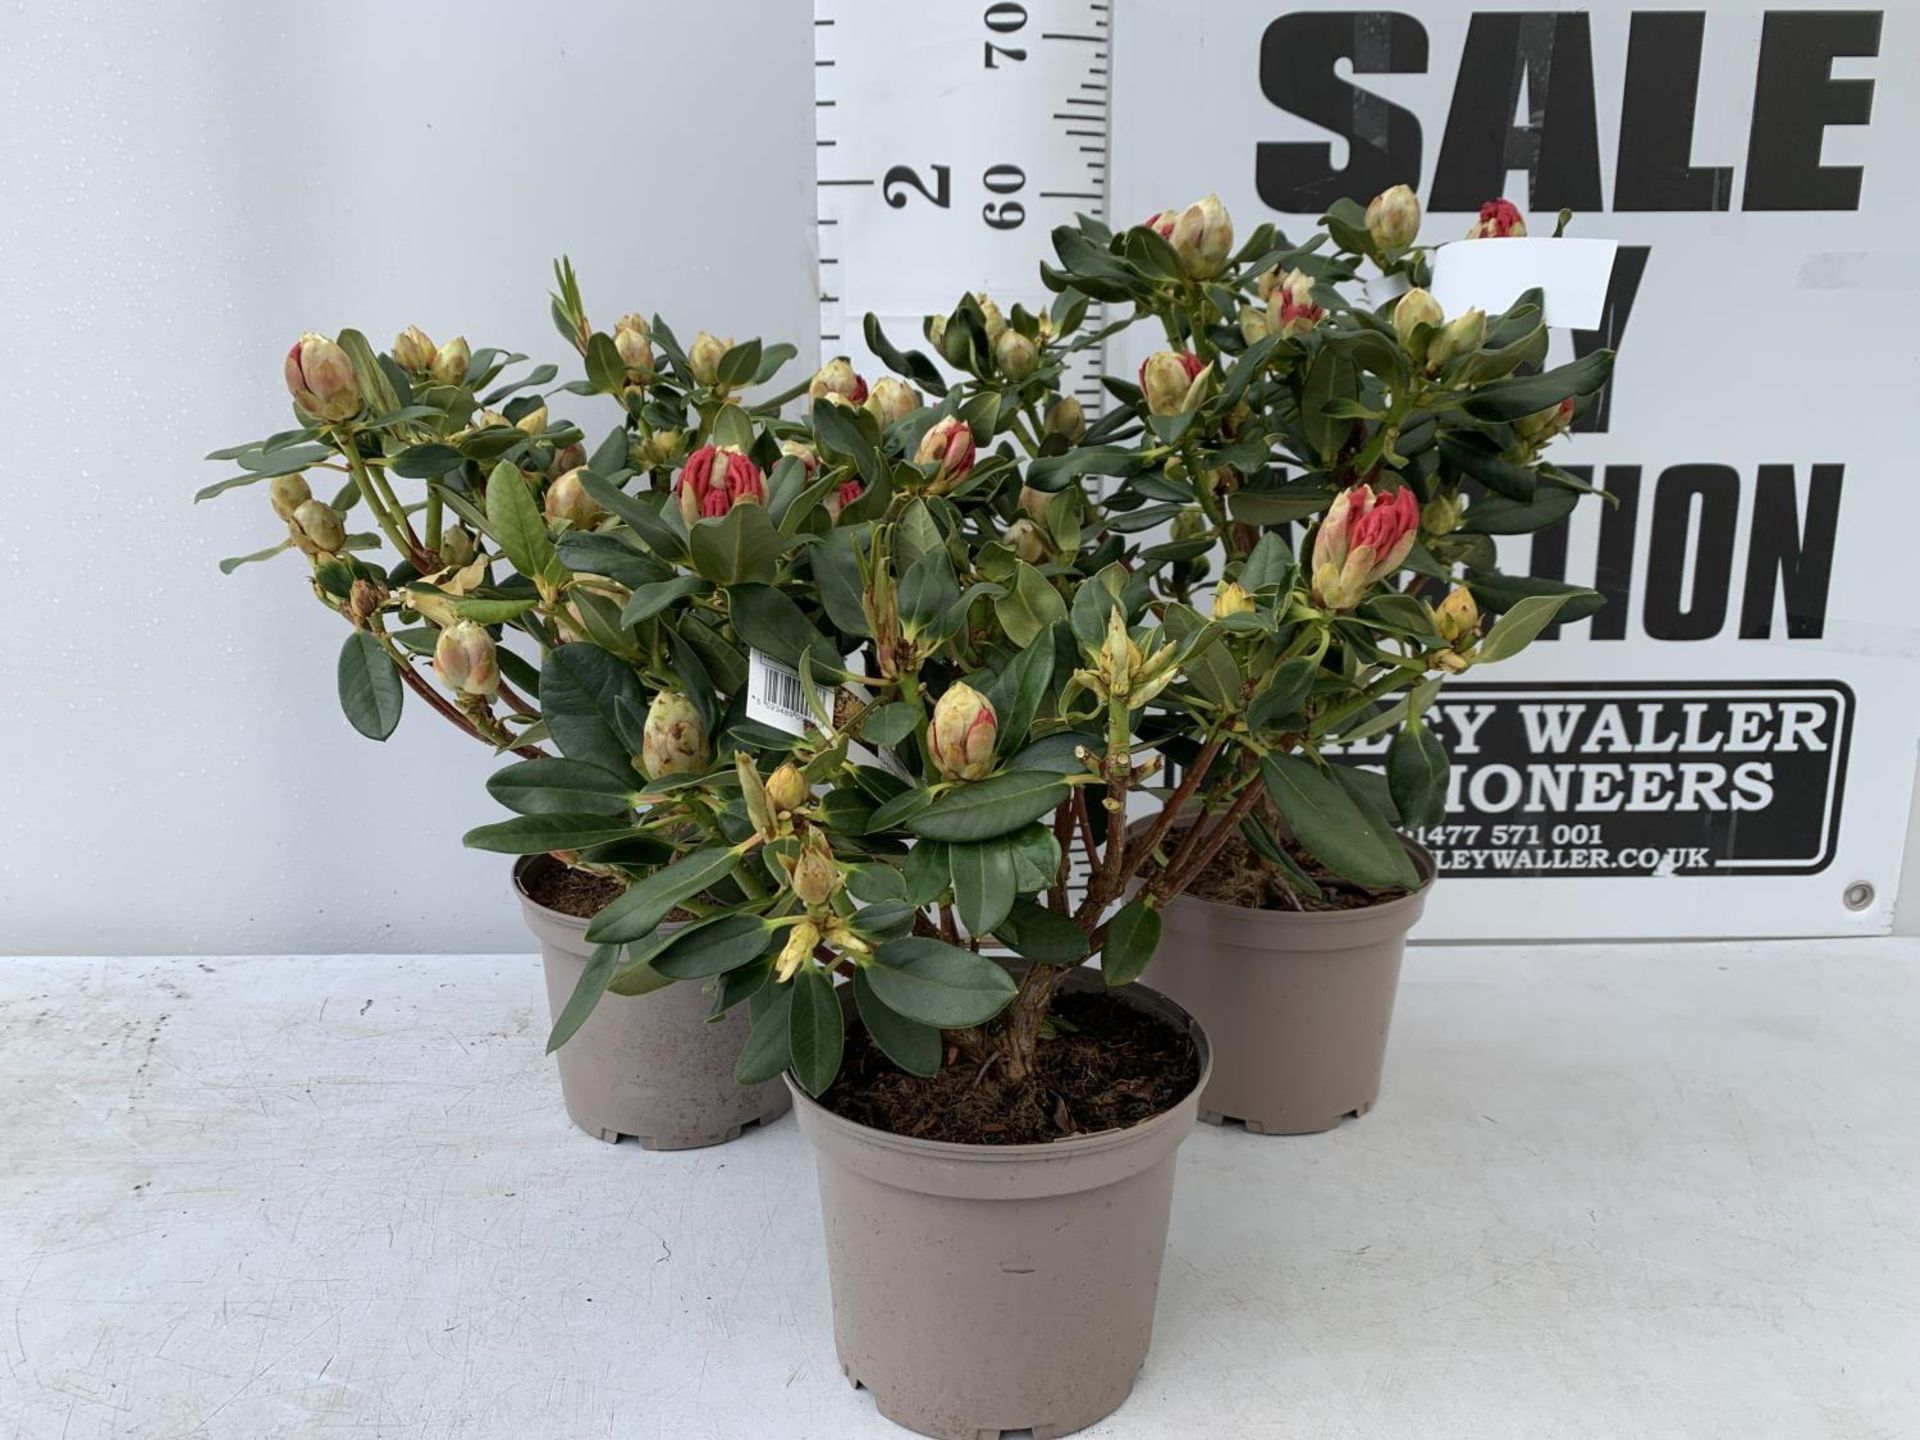 THREE RHODODENDRON NANCY EVANS IN 3 LTR POTS HEIGHT 50CM TO BE SOLD FOR THE THREE PLUS VAT - Image 2 of 12